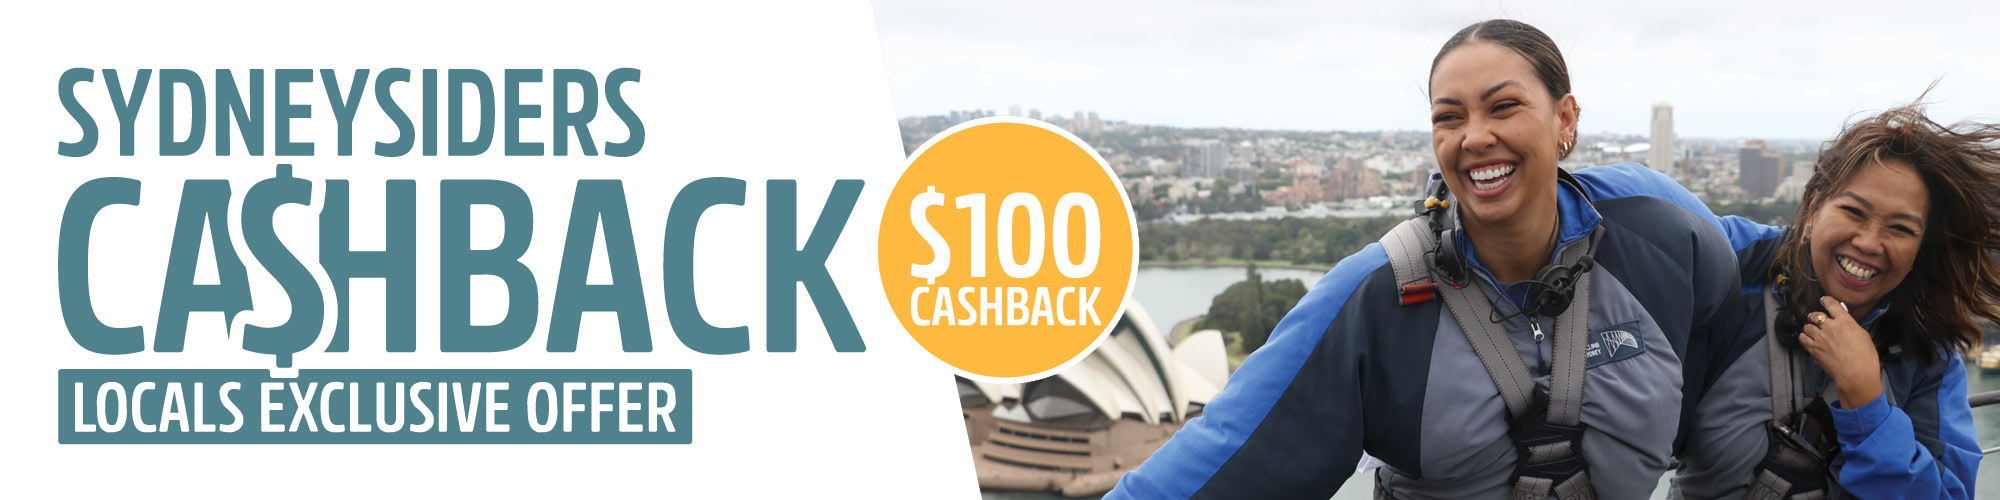 bridgeclimb's exclusive local cashback off for sydneysiders, climb and get up to $100 back